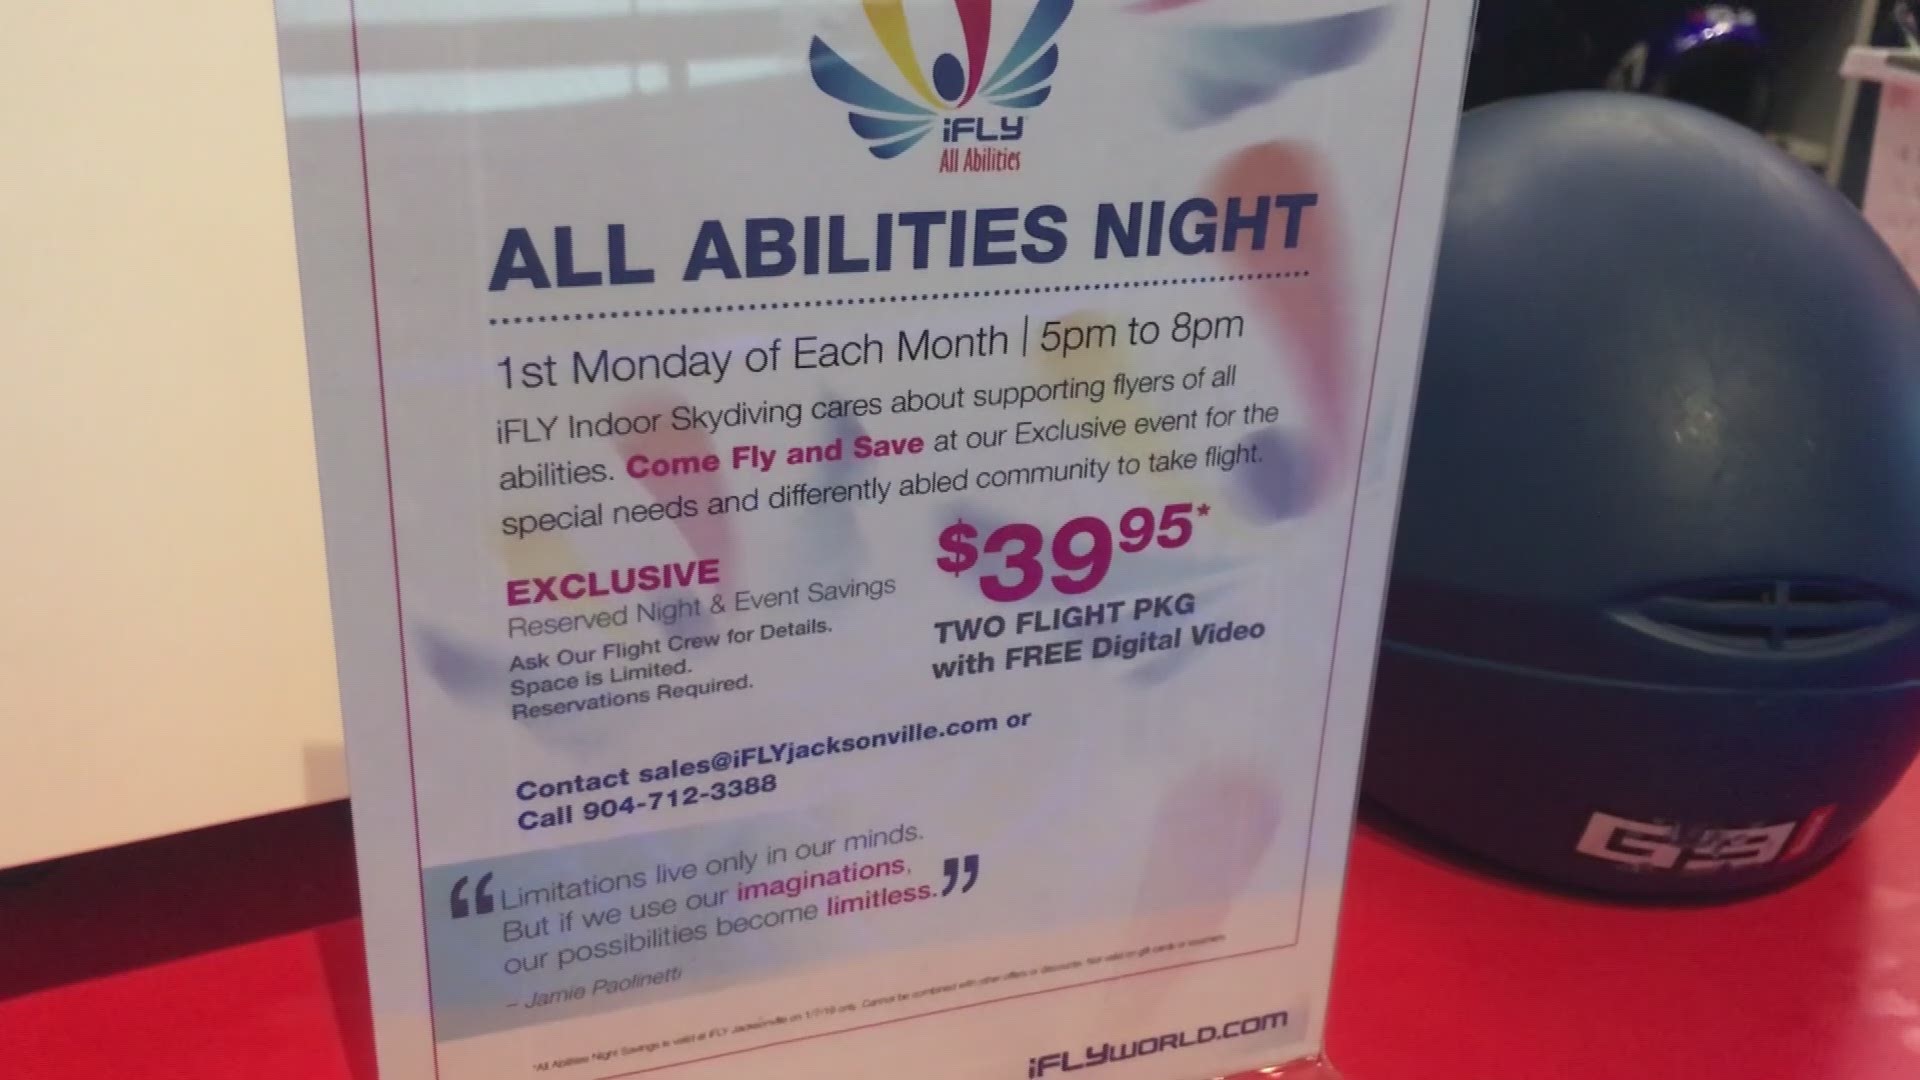 All Abilities Night at iFLY is a unique event that makes the dream of flight a reality for those in the special needs community.